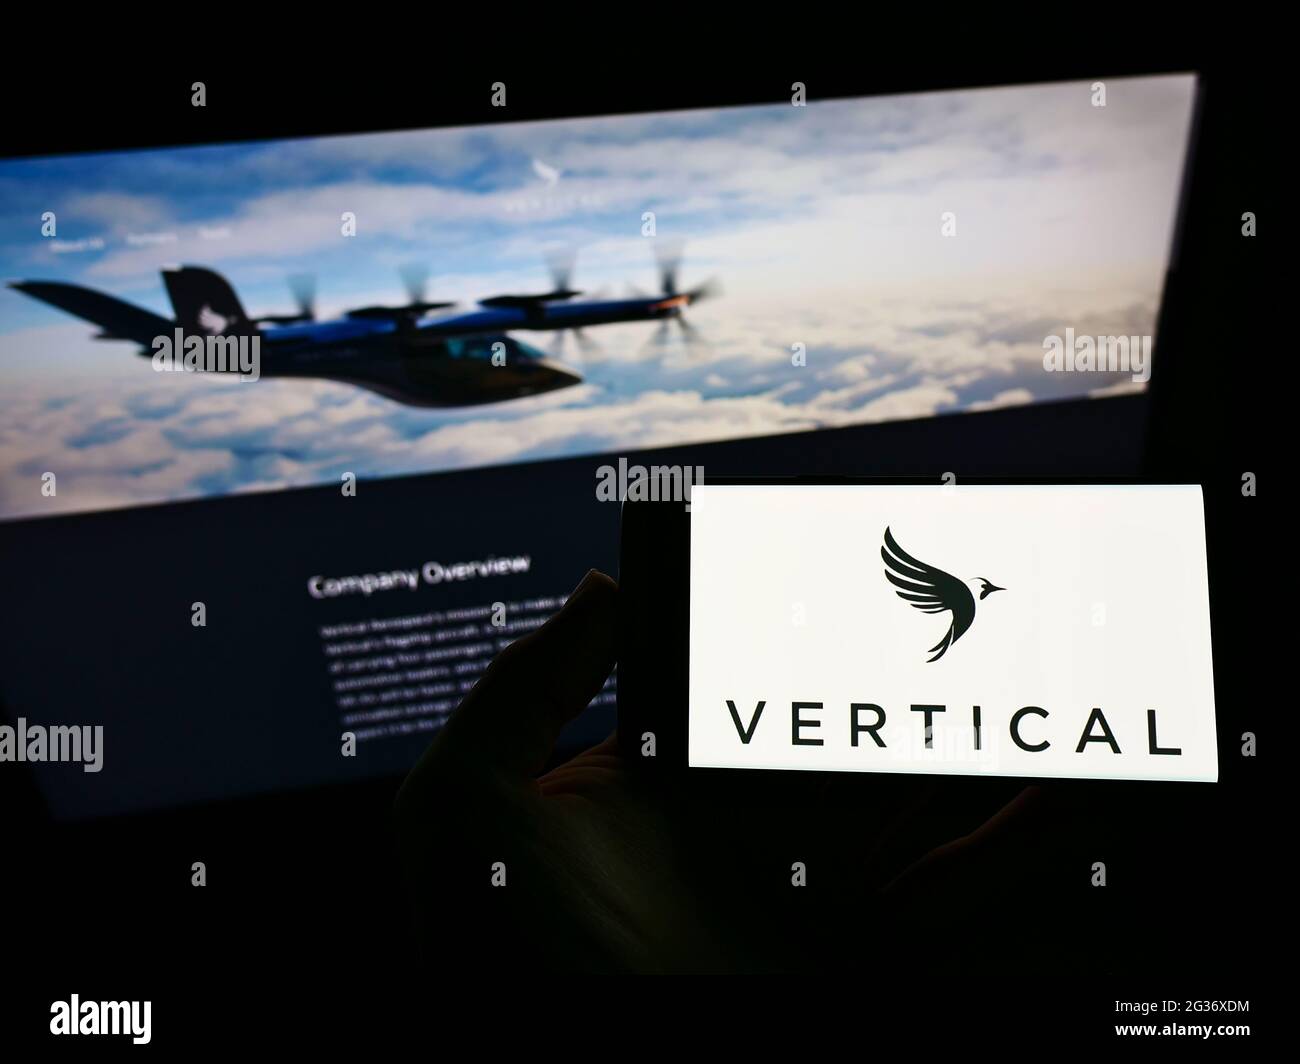 Person holding mobile phone with logo of British aircraft company Vertical Aerospace Ltd. on screen in front of web page. Focus on phone display. Stock Photo